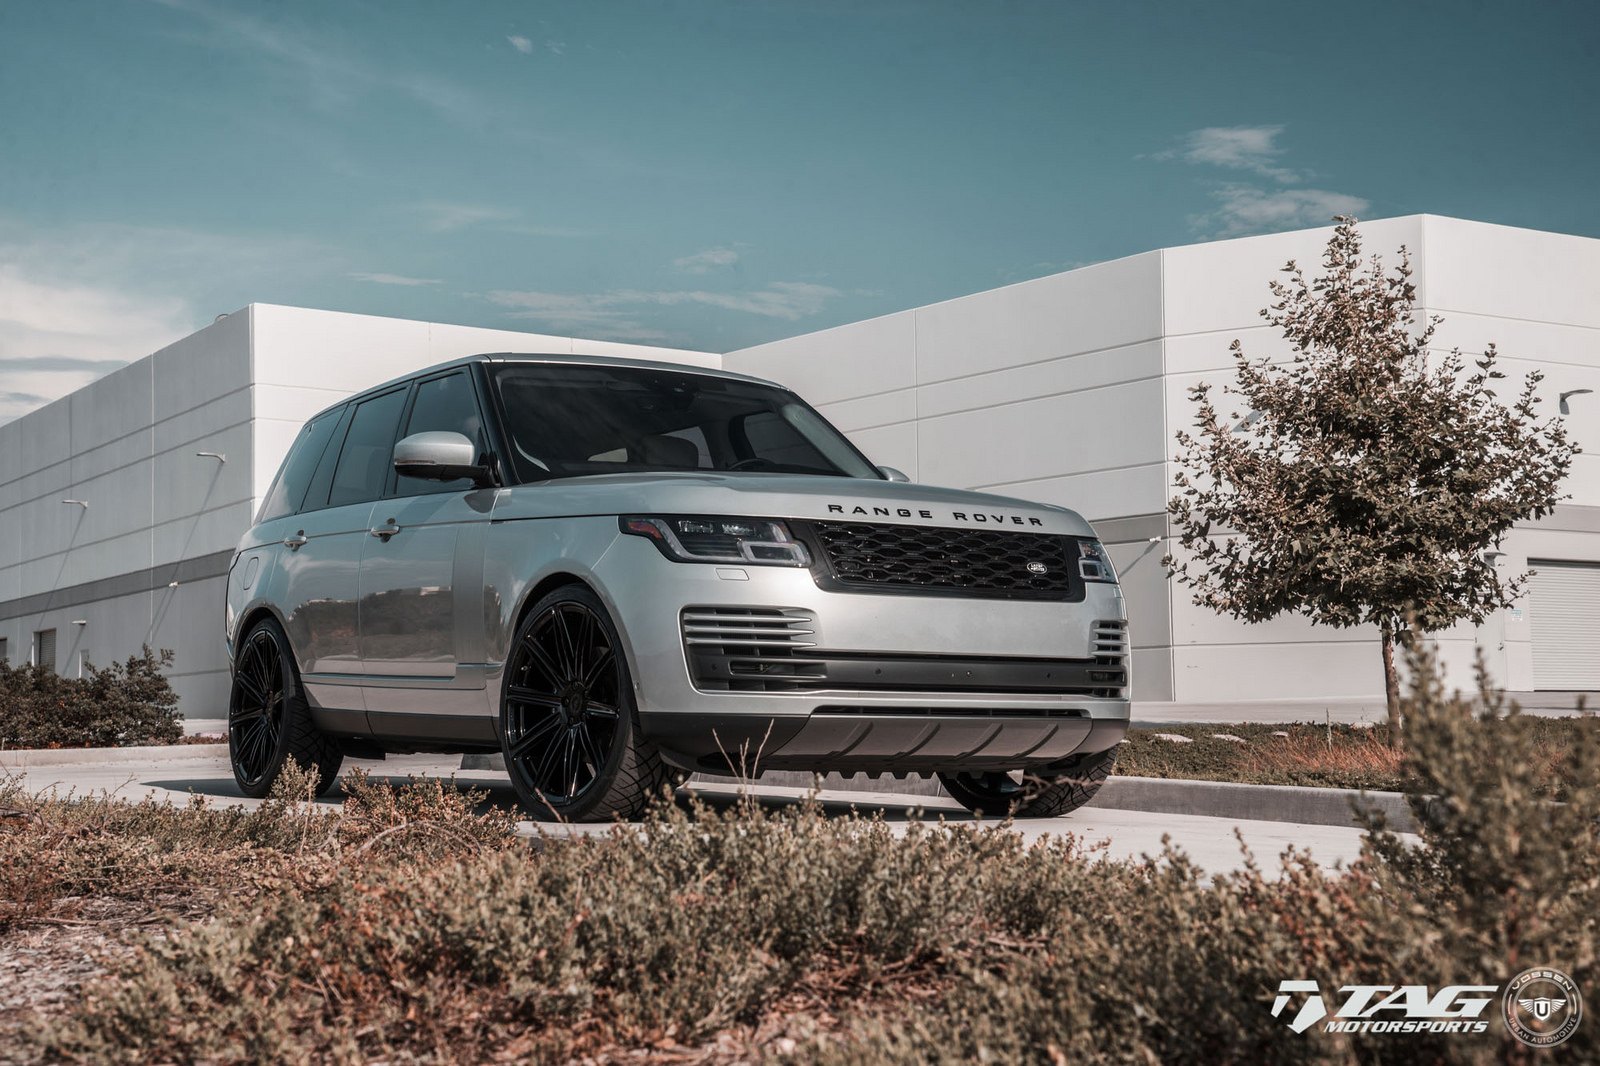 Gray Range Rover with Blacked Out Mesh Grille - Photo by Vossen